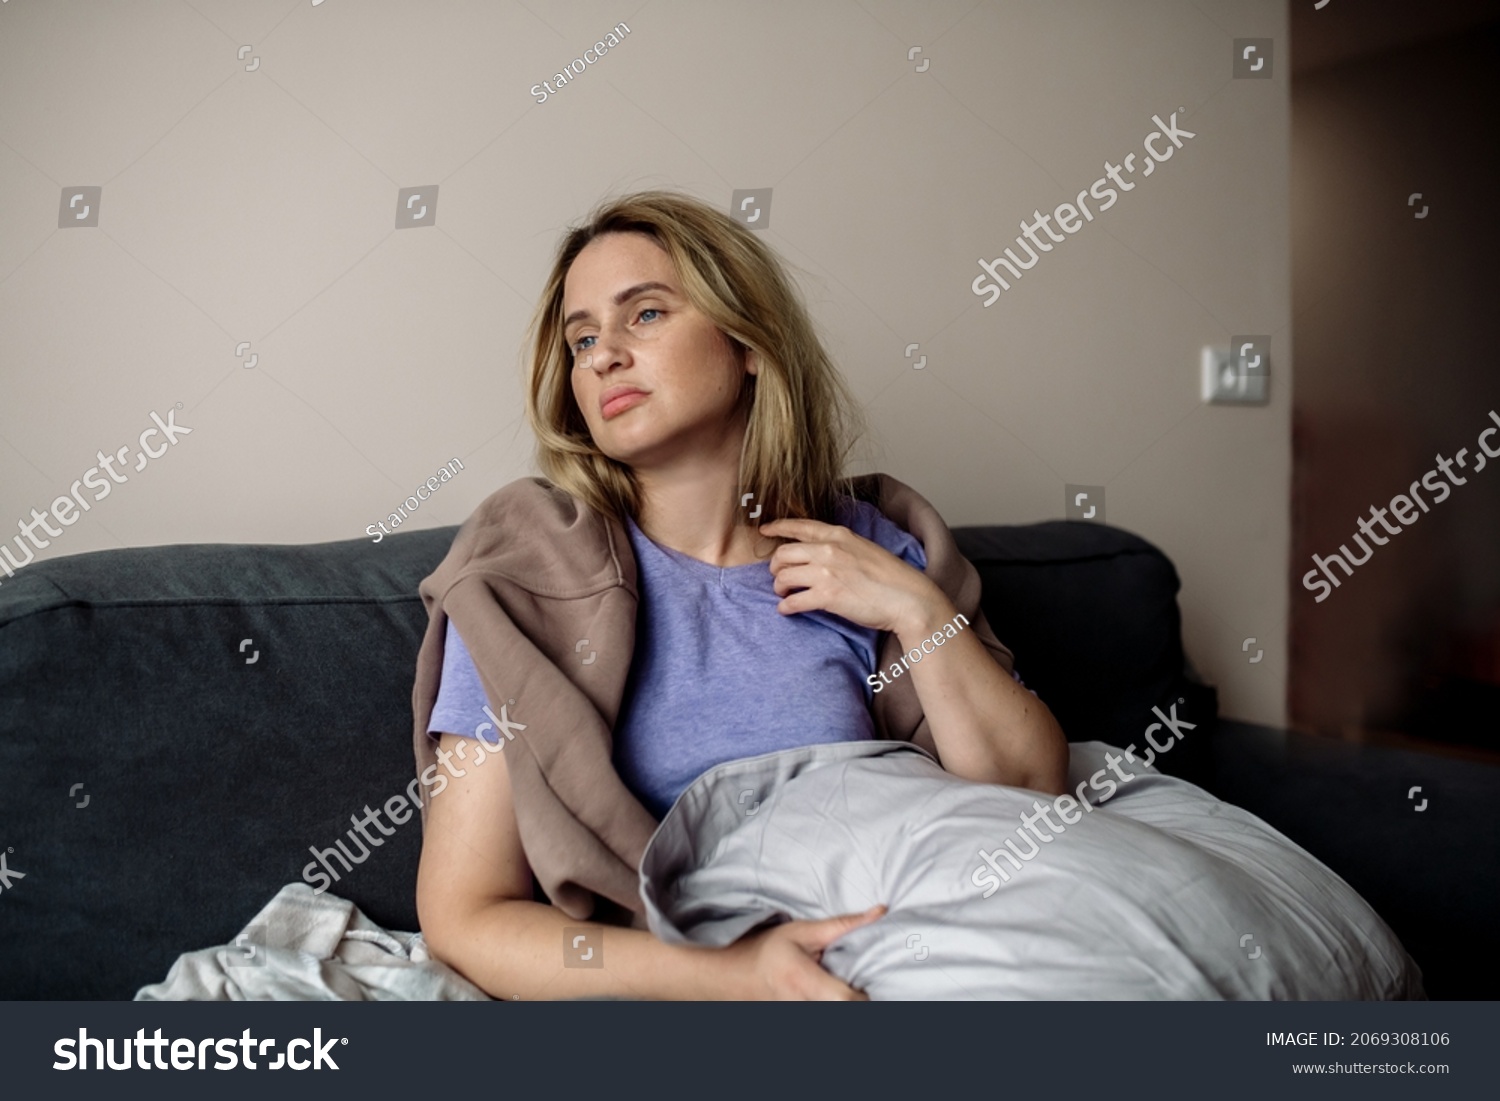 young woman with long covid syndrome - painful condition, headache, sitting on the couch at home #2069308106